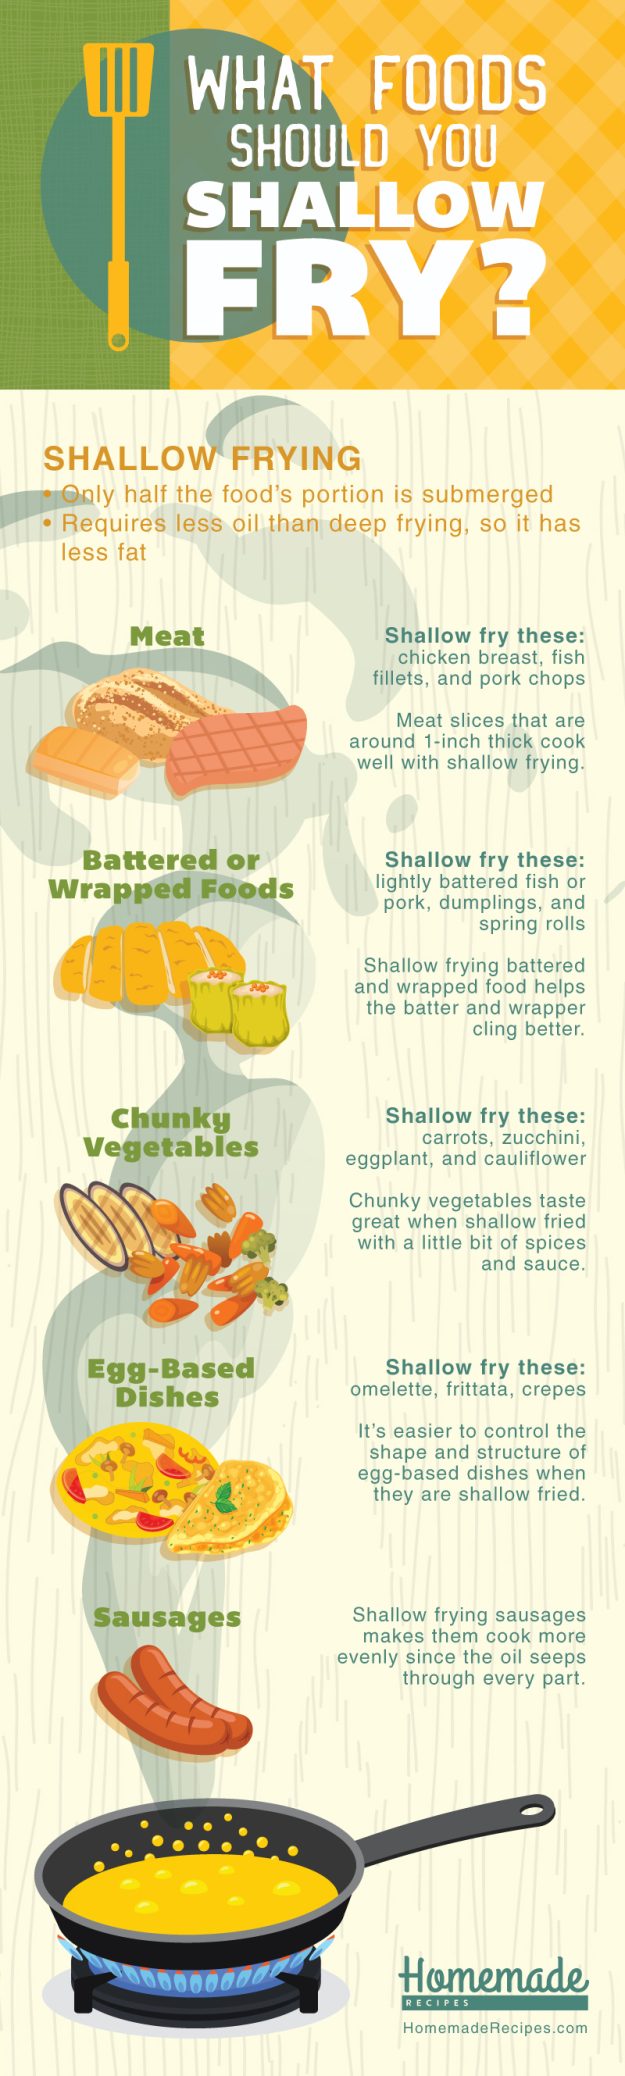 Shallow Frying: What Foods Should You Shallow Fry?